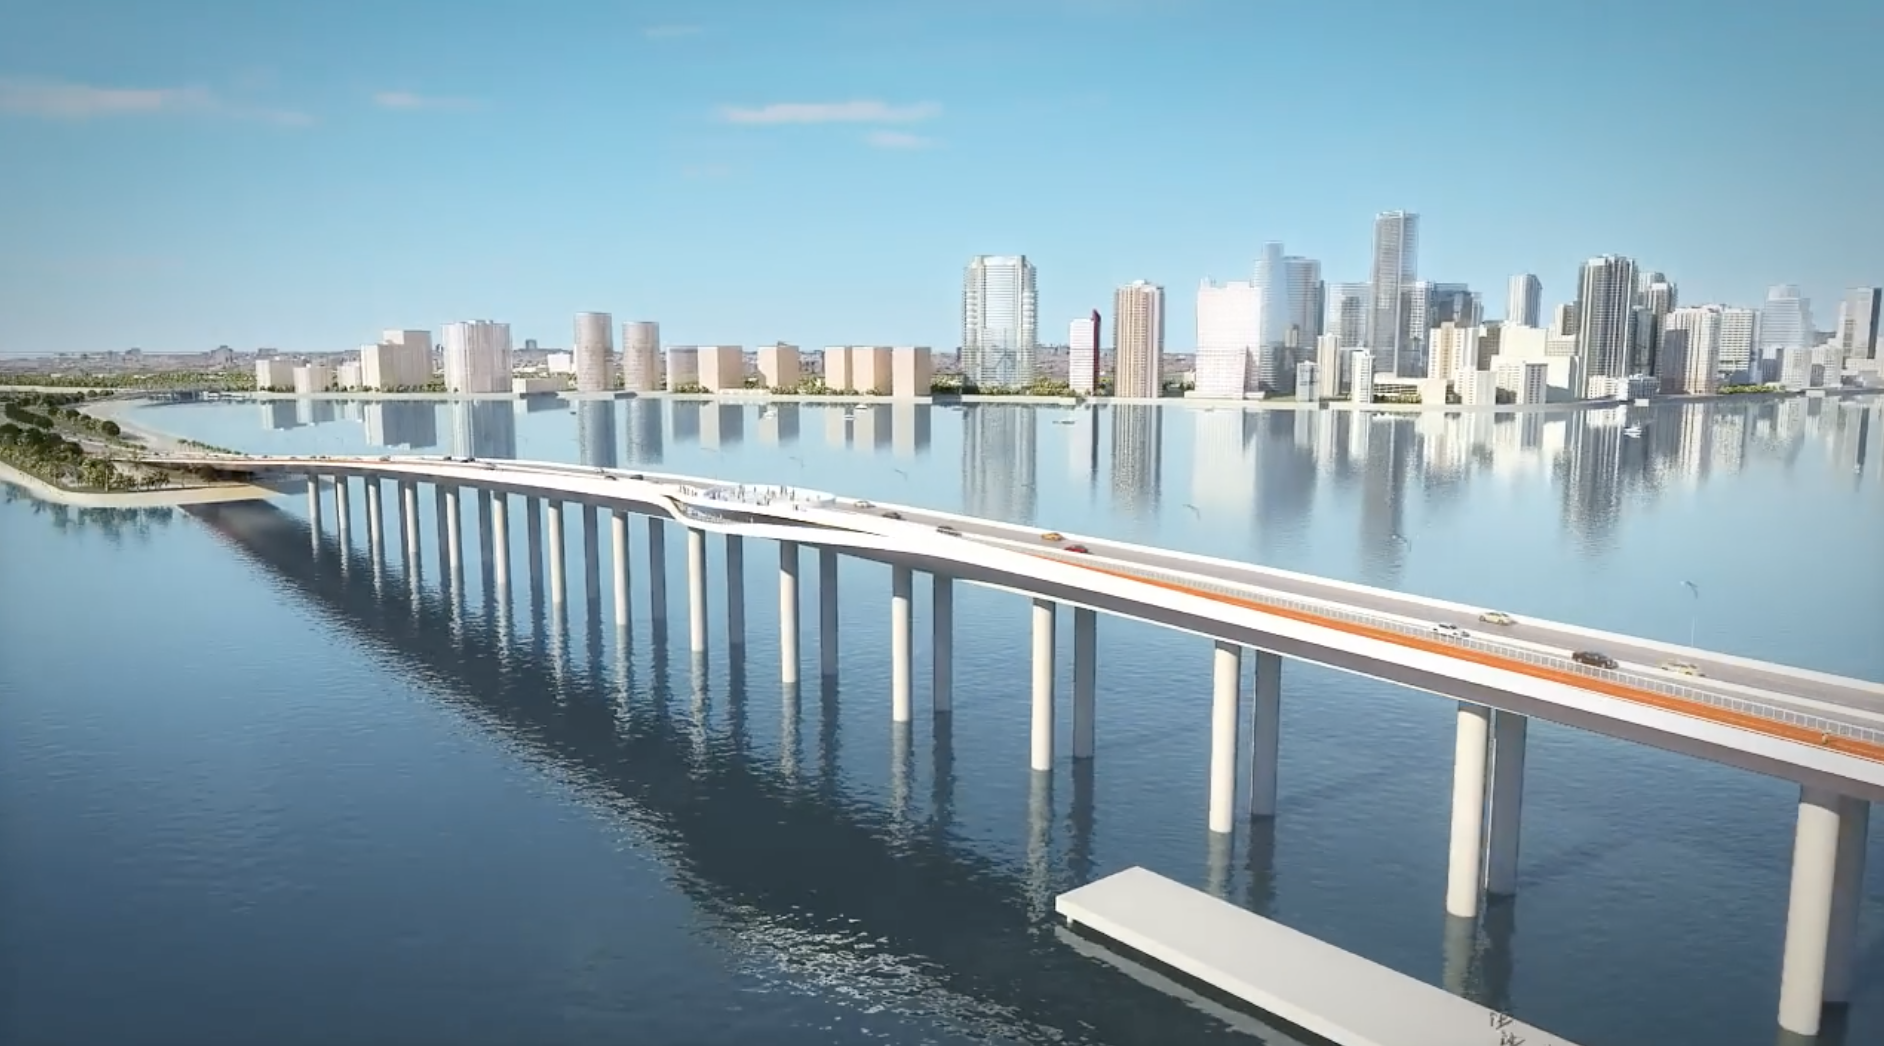 More changes, chat coming on flawed, rushed Rickenbacker Causeway RFP – Political Cortadito